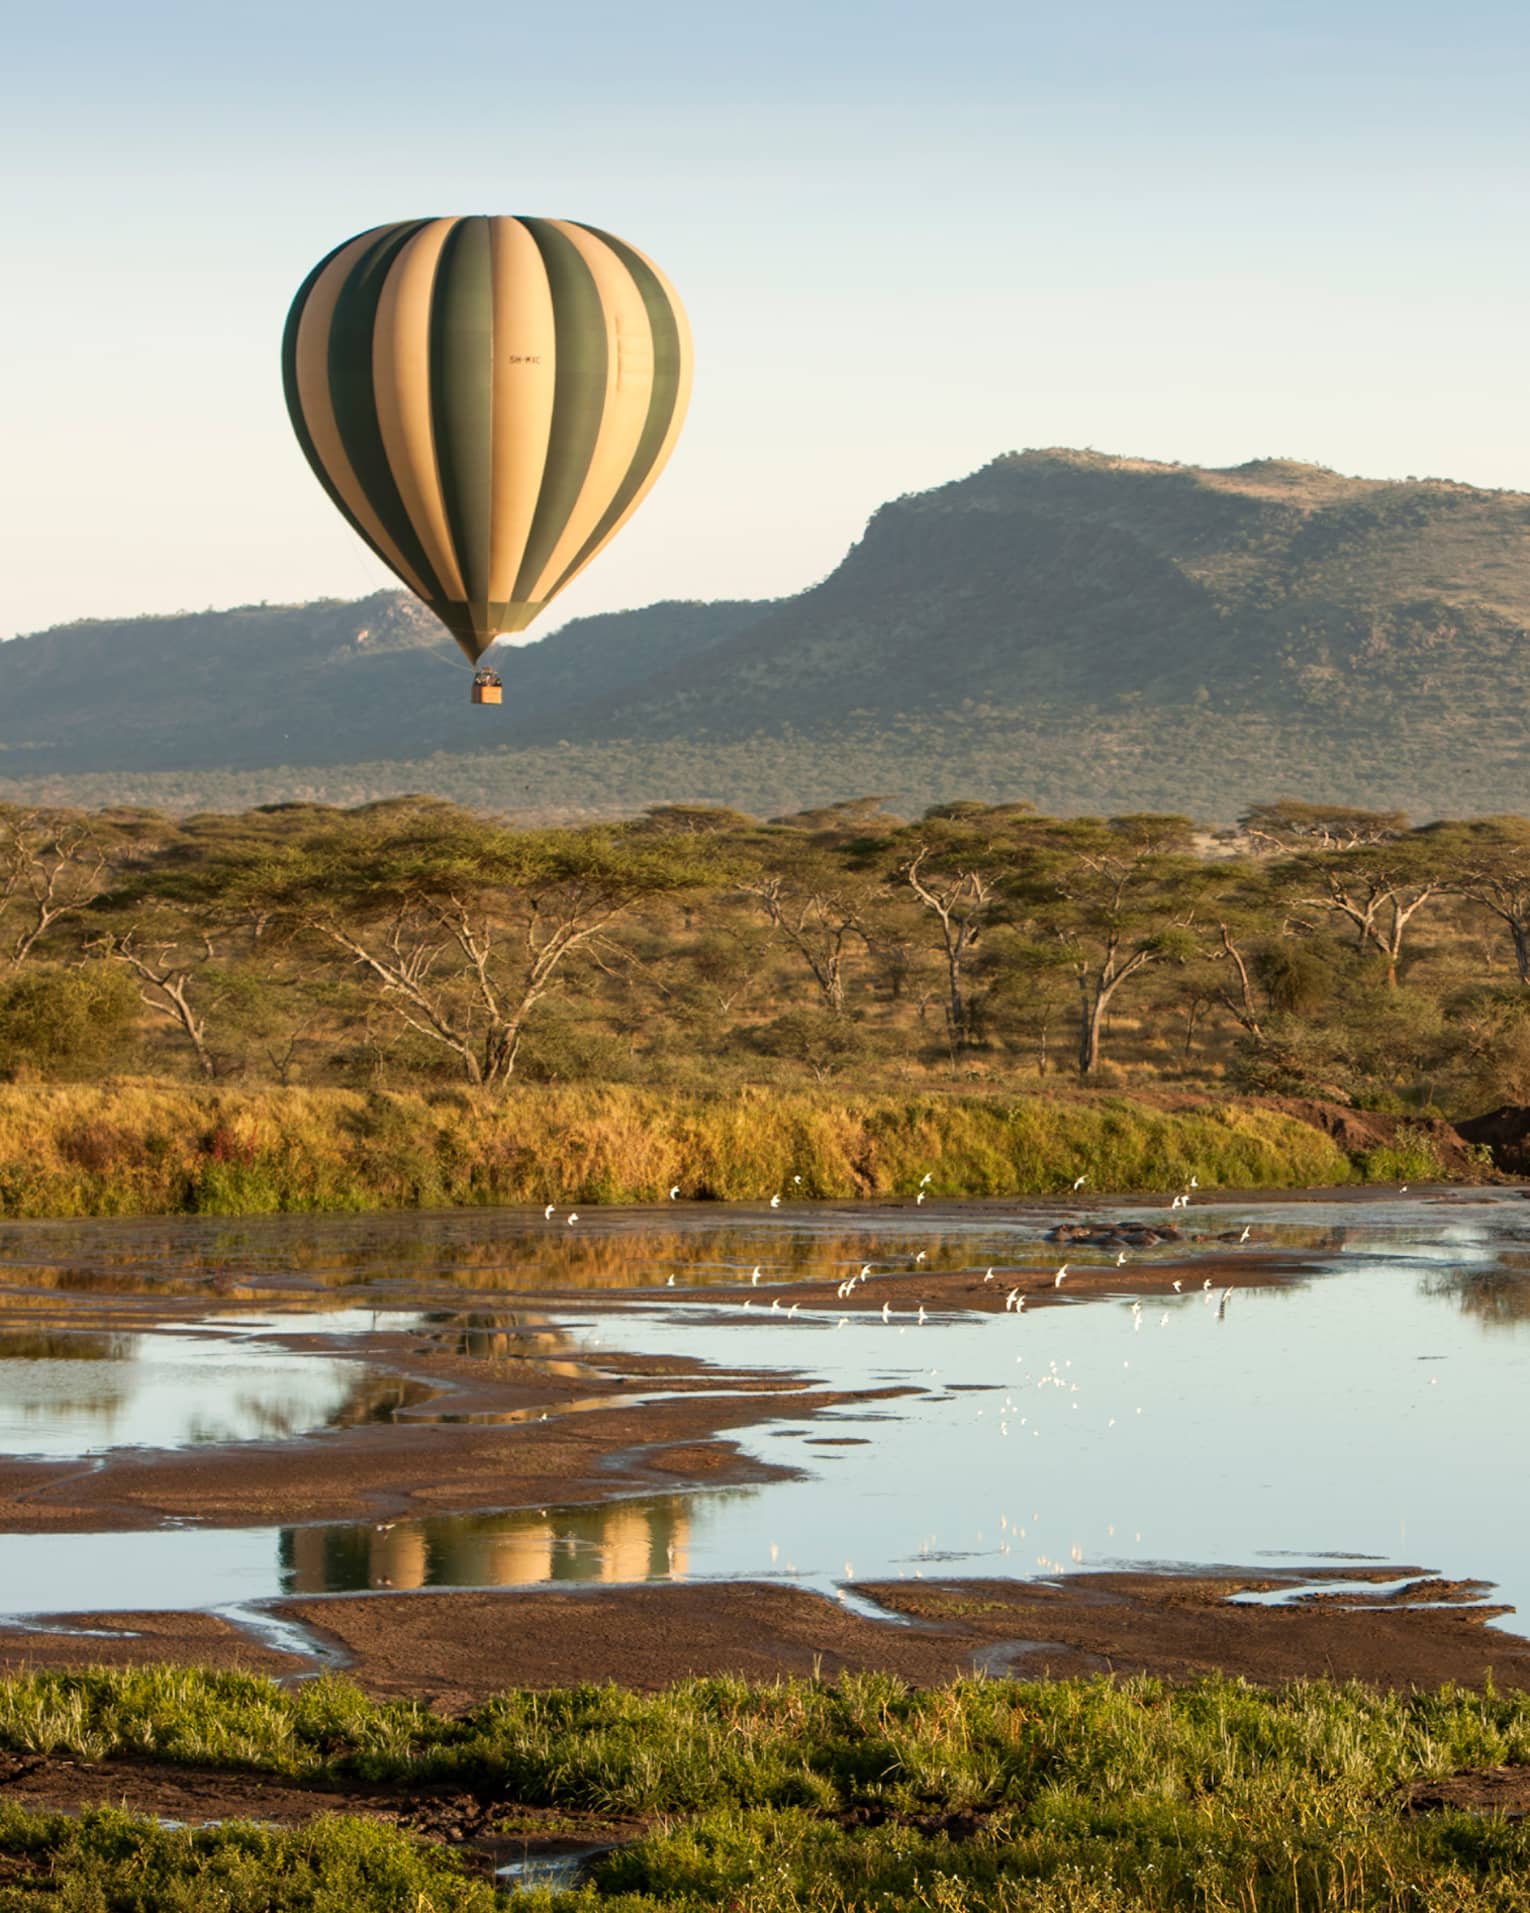 Striped hot air balloon floating over Serengeti fields, ponds